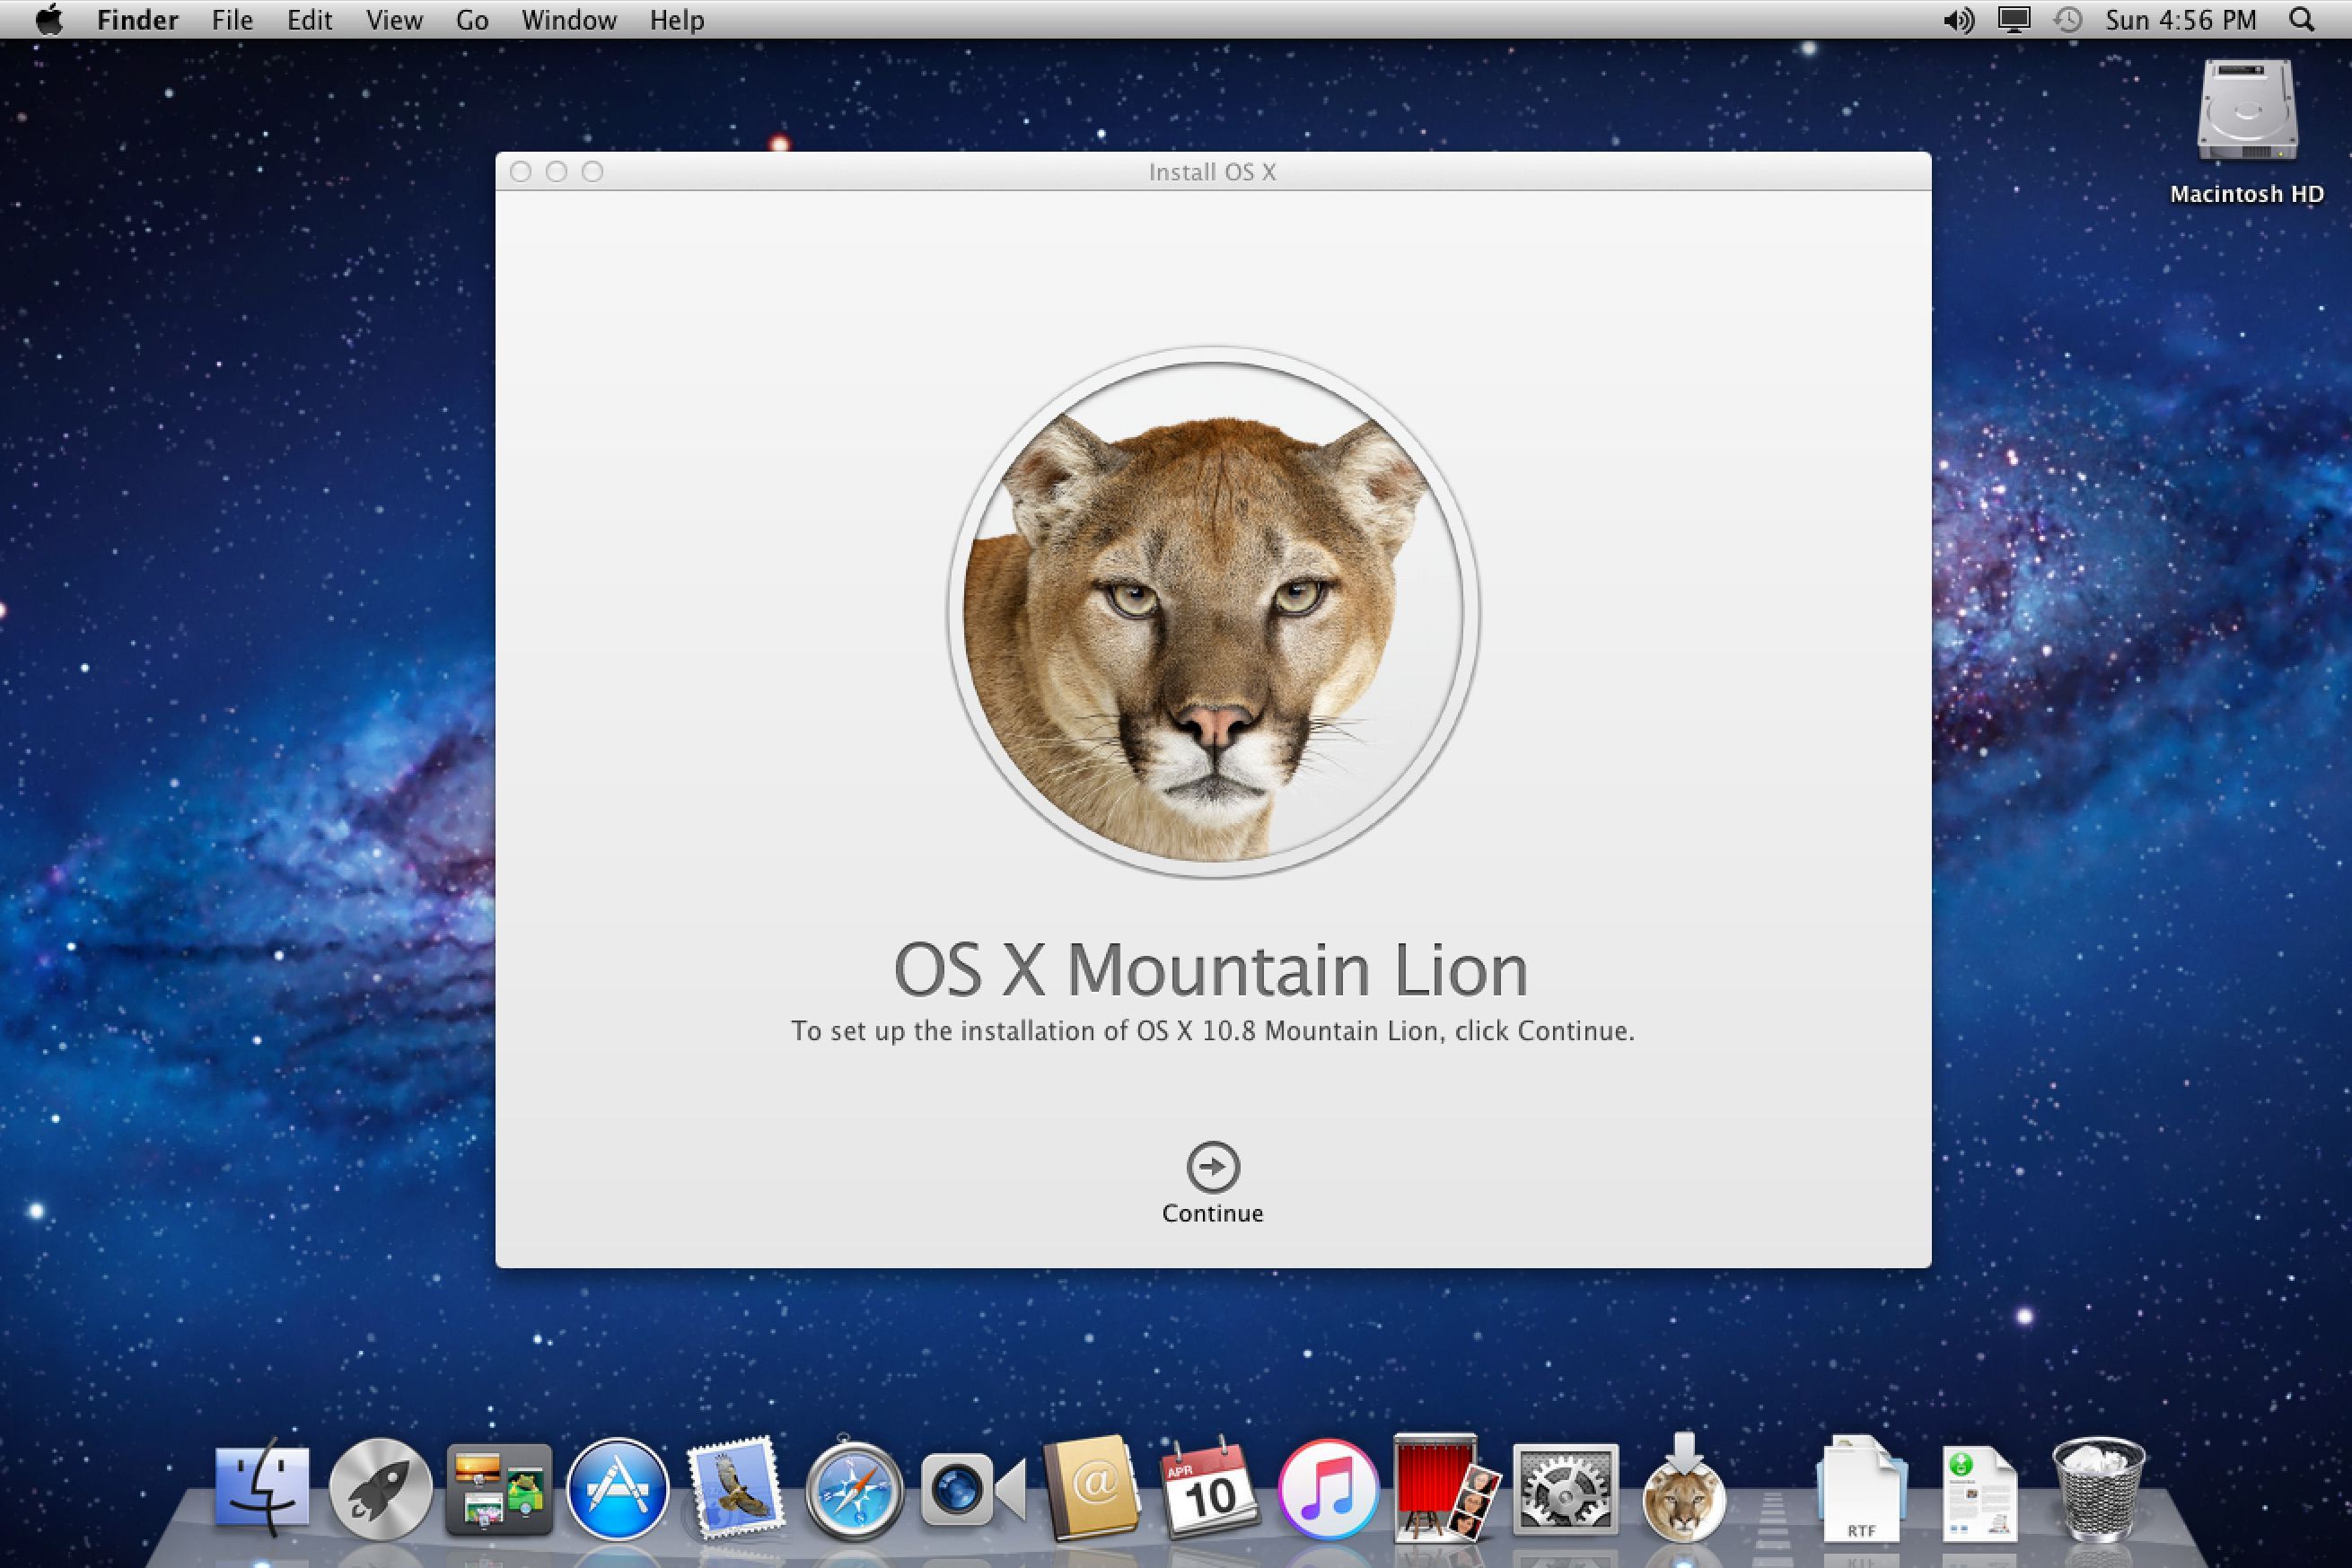 How To Get Mountain Lion Os X For Free